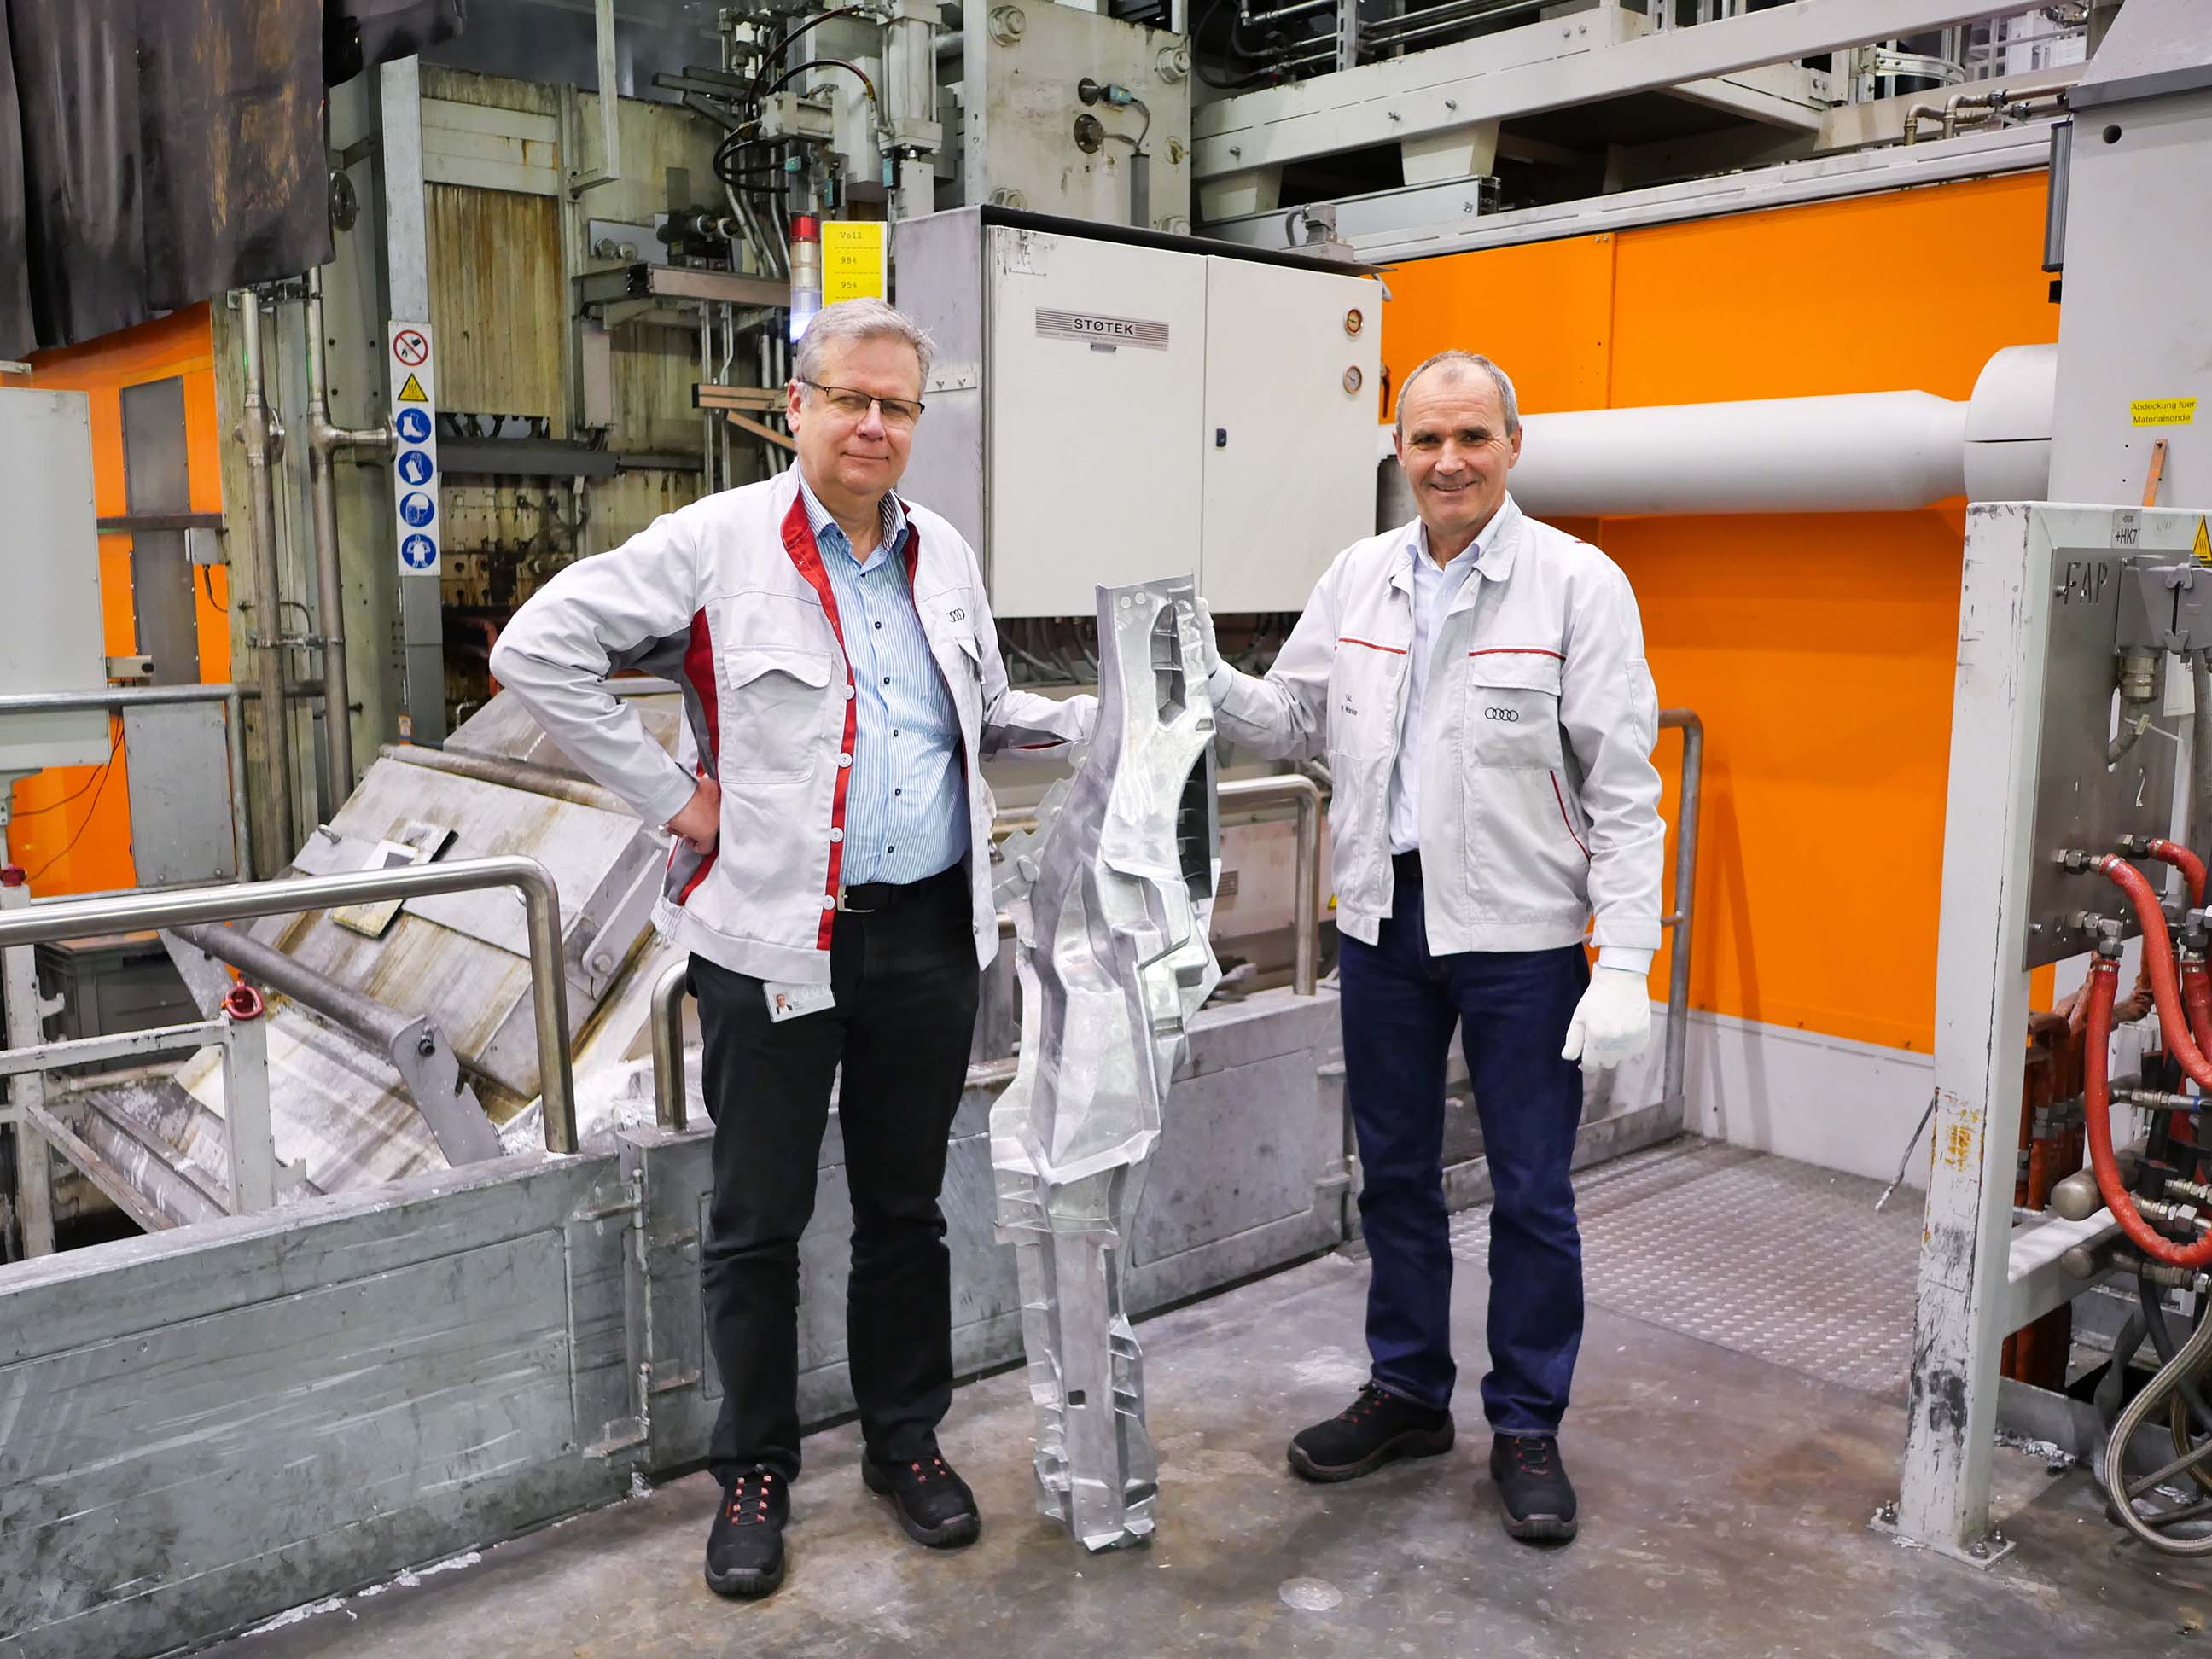 Audi chooses Støtek to increase their furnace reliability and metal quality